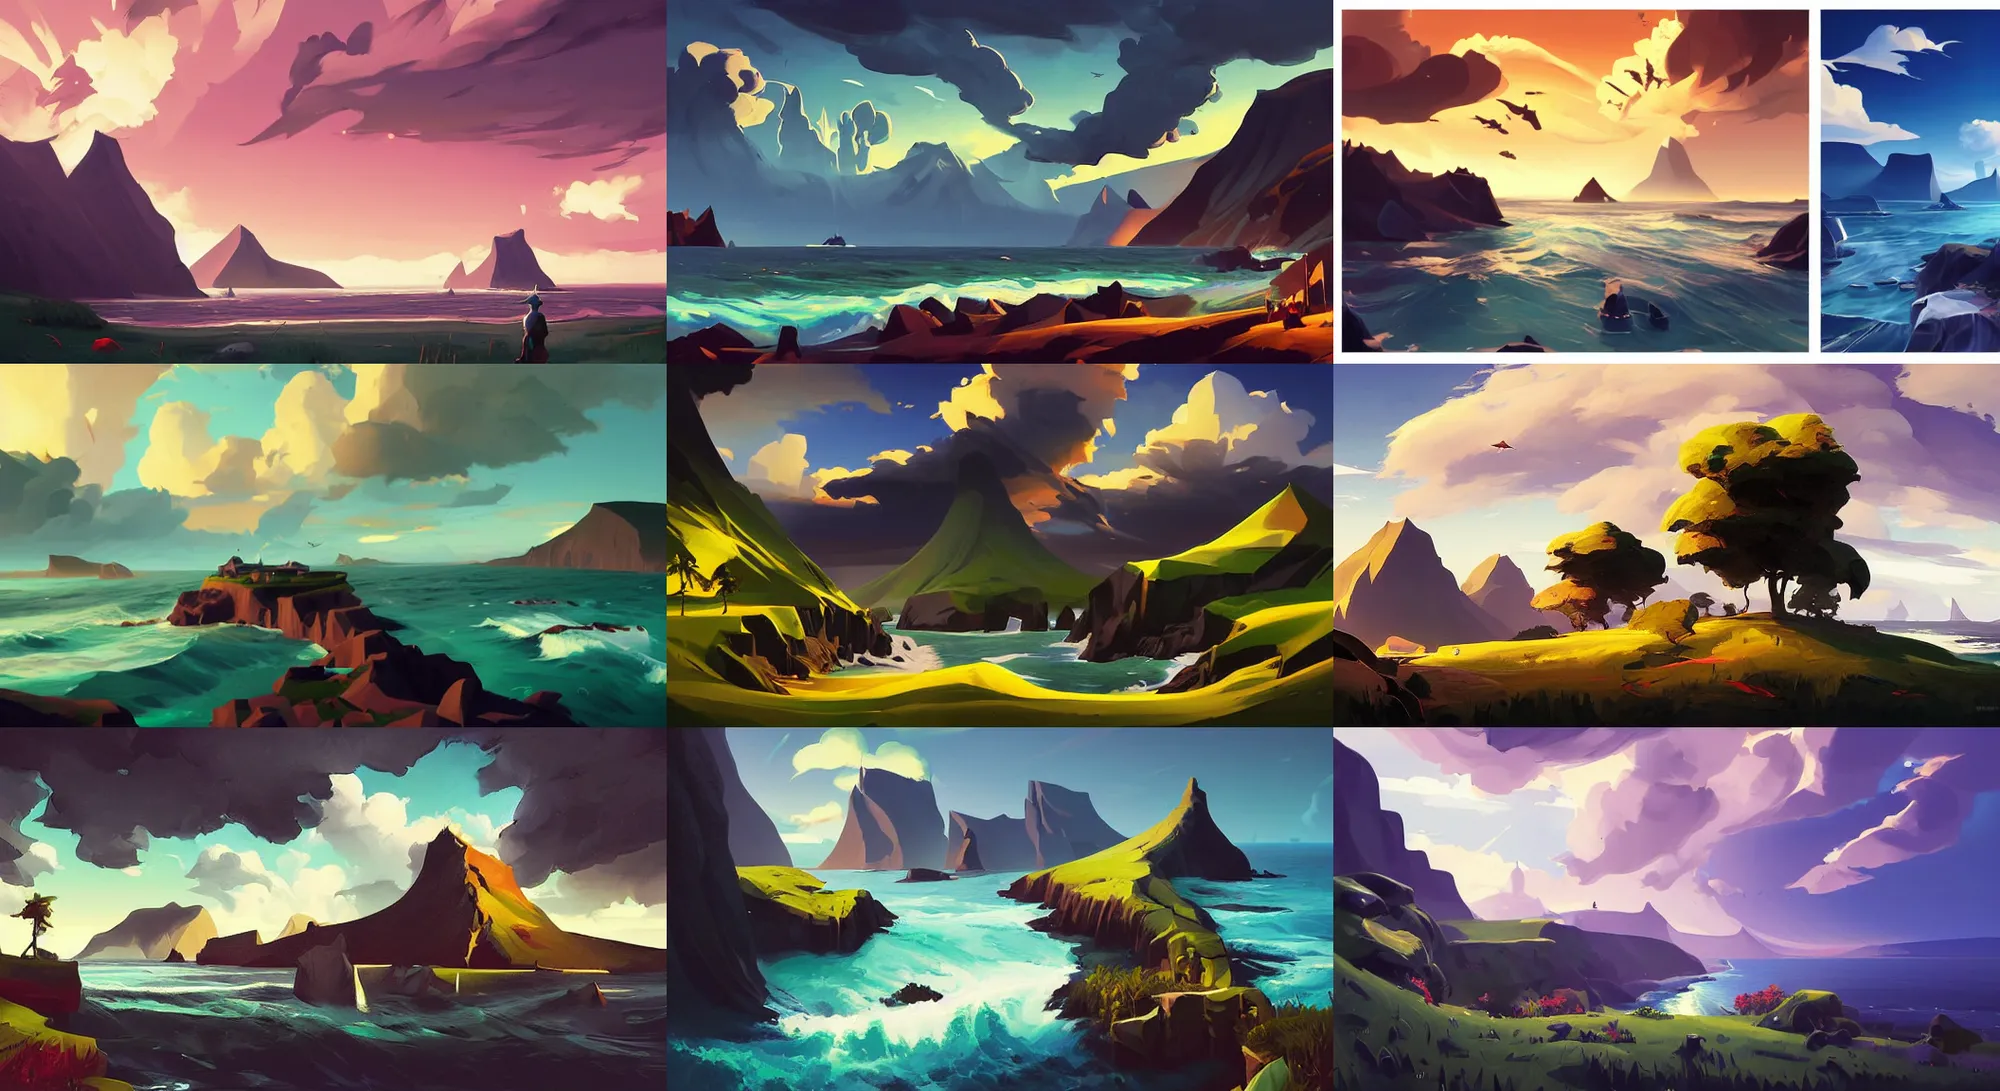 Prompt: landscape painting by sargent dark painting treasure on sea of thieves game smooth median photoshop filter cutout vector, faroe azores falklend lofoten by jesper ejsing, by rhads, makoto shinkai and lois van baarle, ilya kuvshinov, rossdraws global illumination adove low black thunder clouds sky image overcast